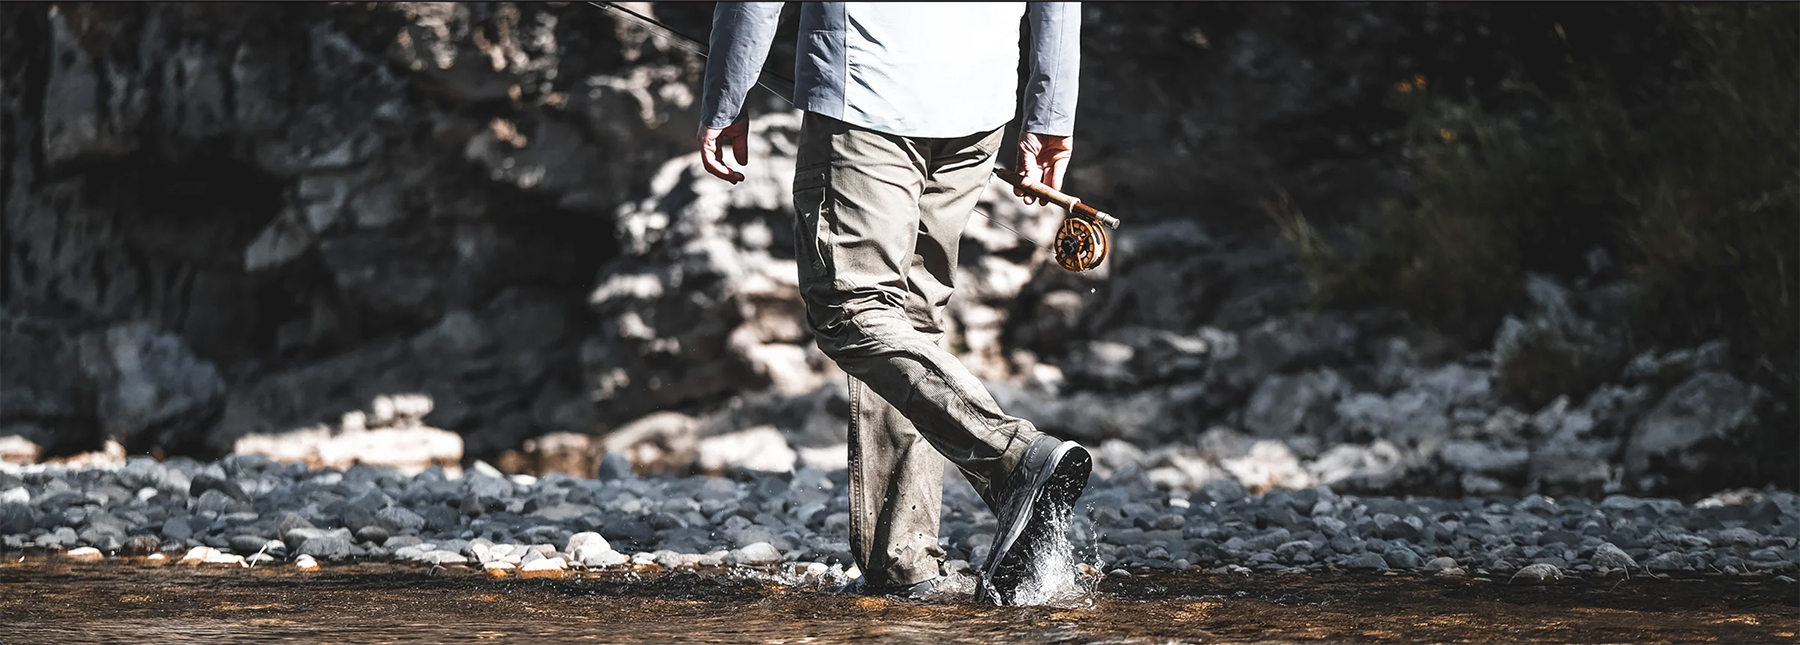 Wholesale fishing waders pants To Improve Fishing Experience 